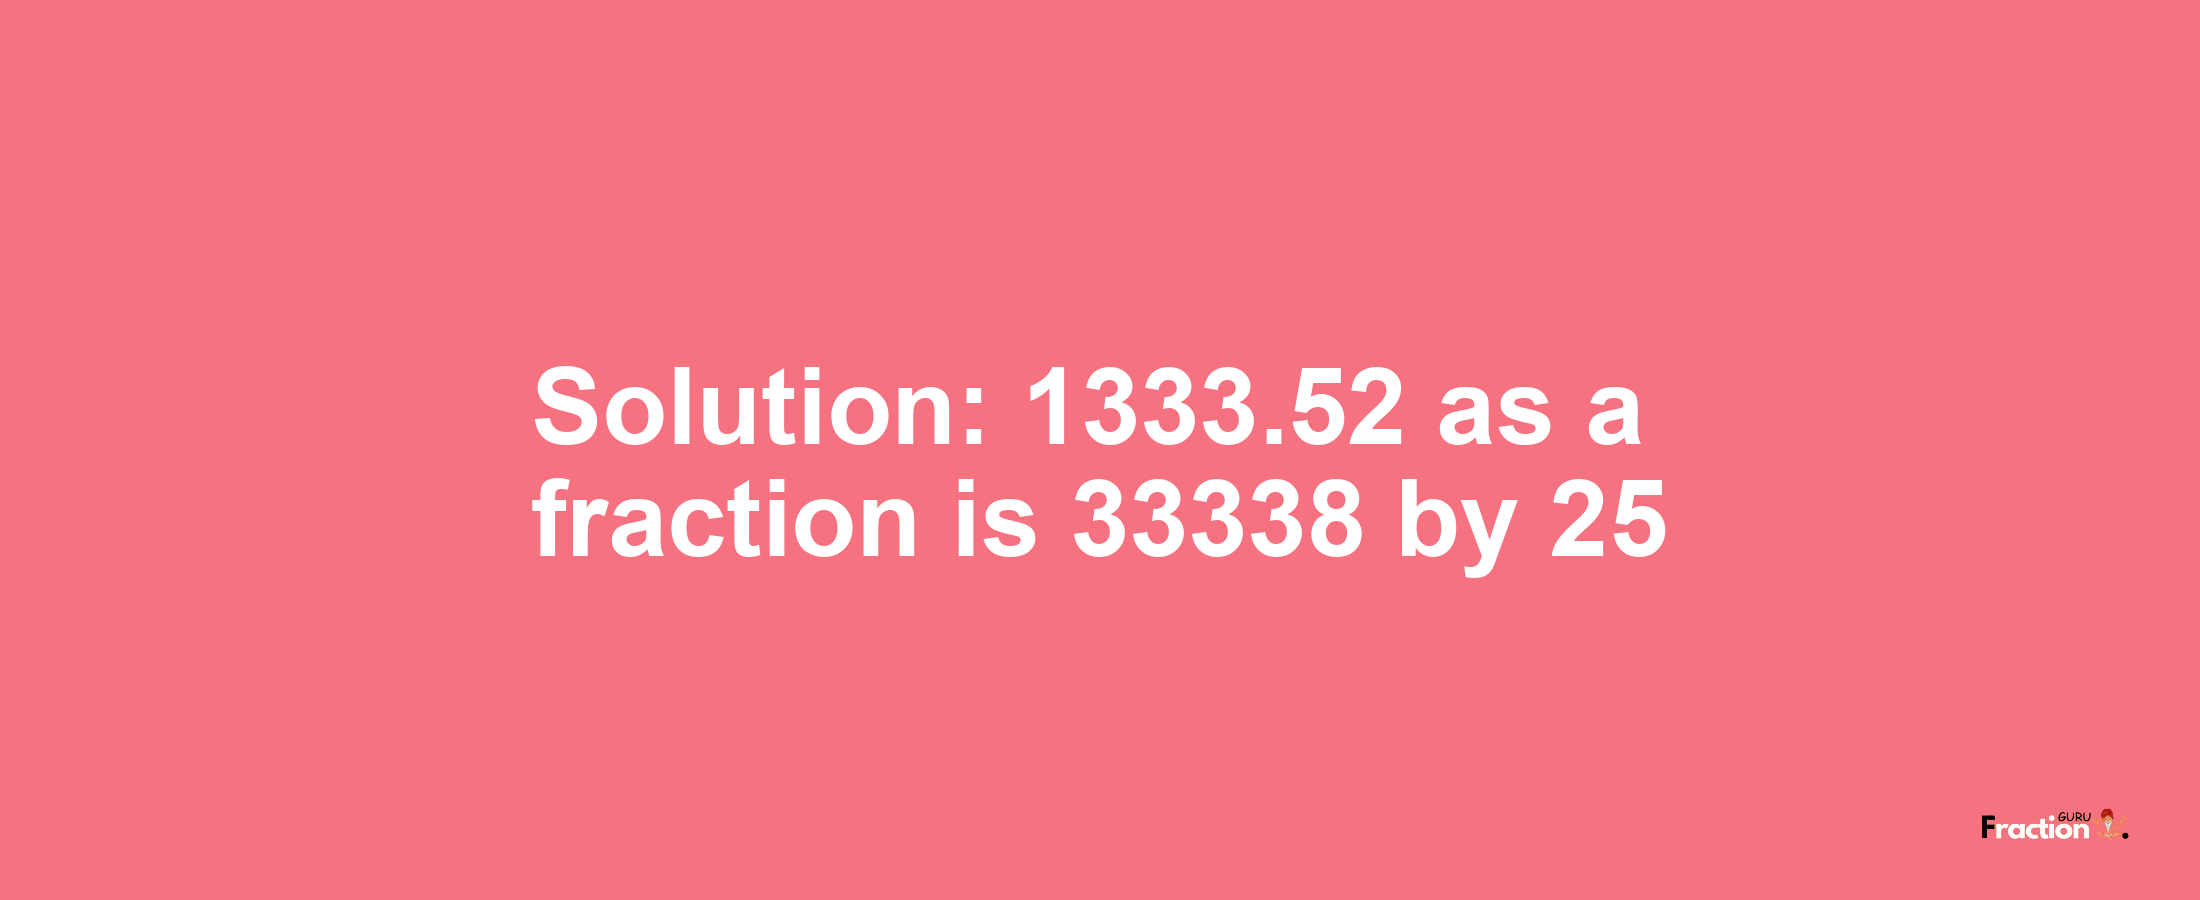 Solution:1333.52 as a fraction is 33338/25